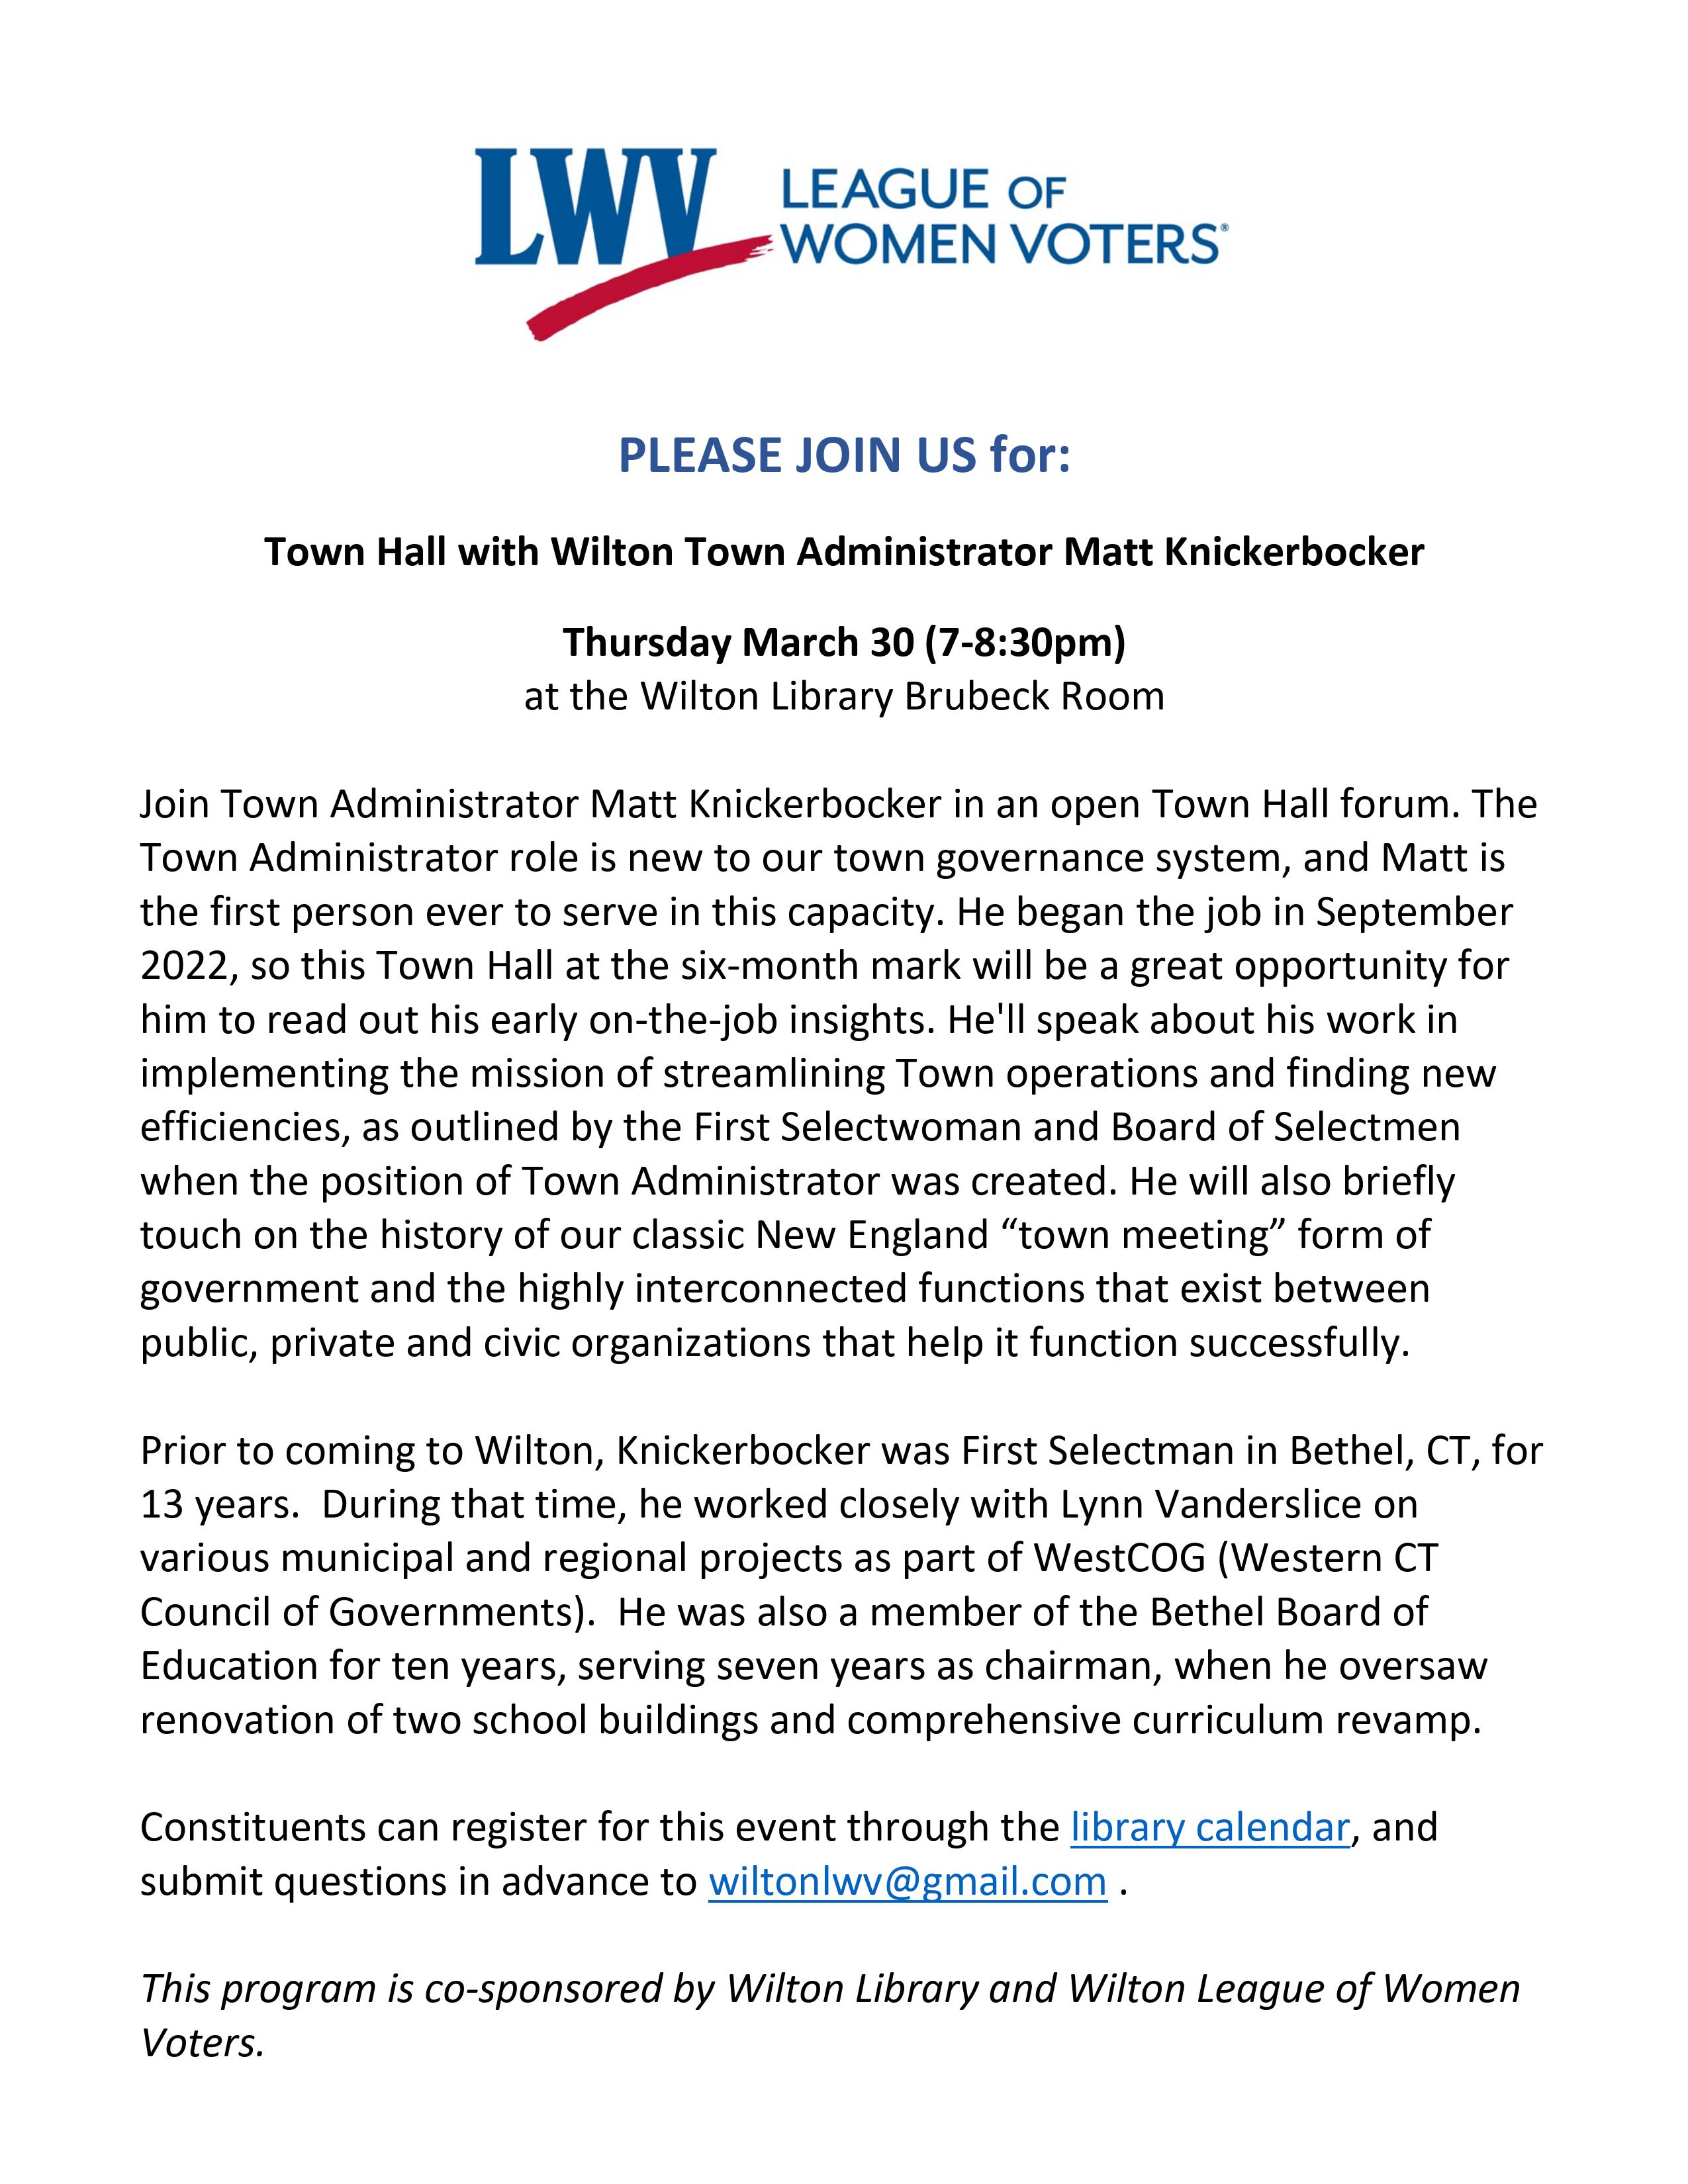 Press release for Wilton LWV town hall event with LWV logo in color